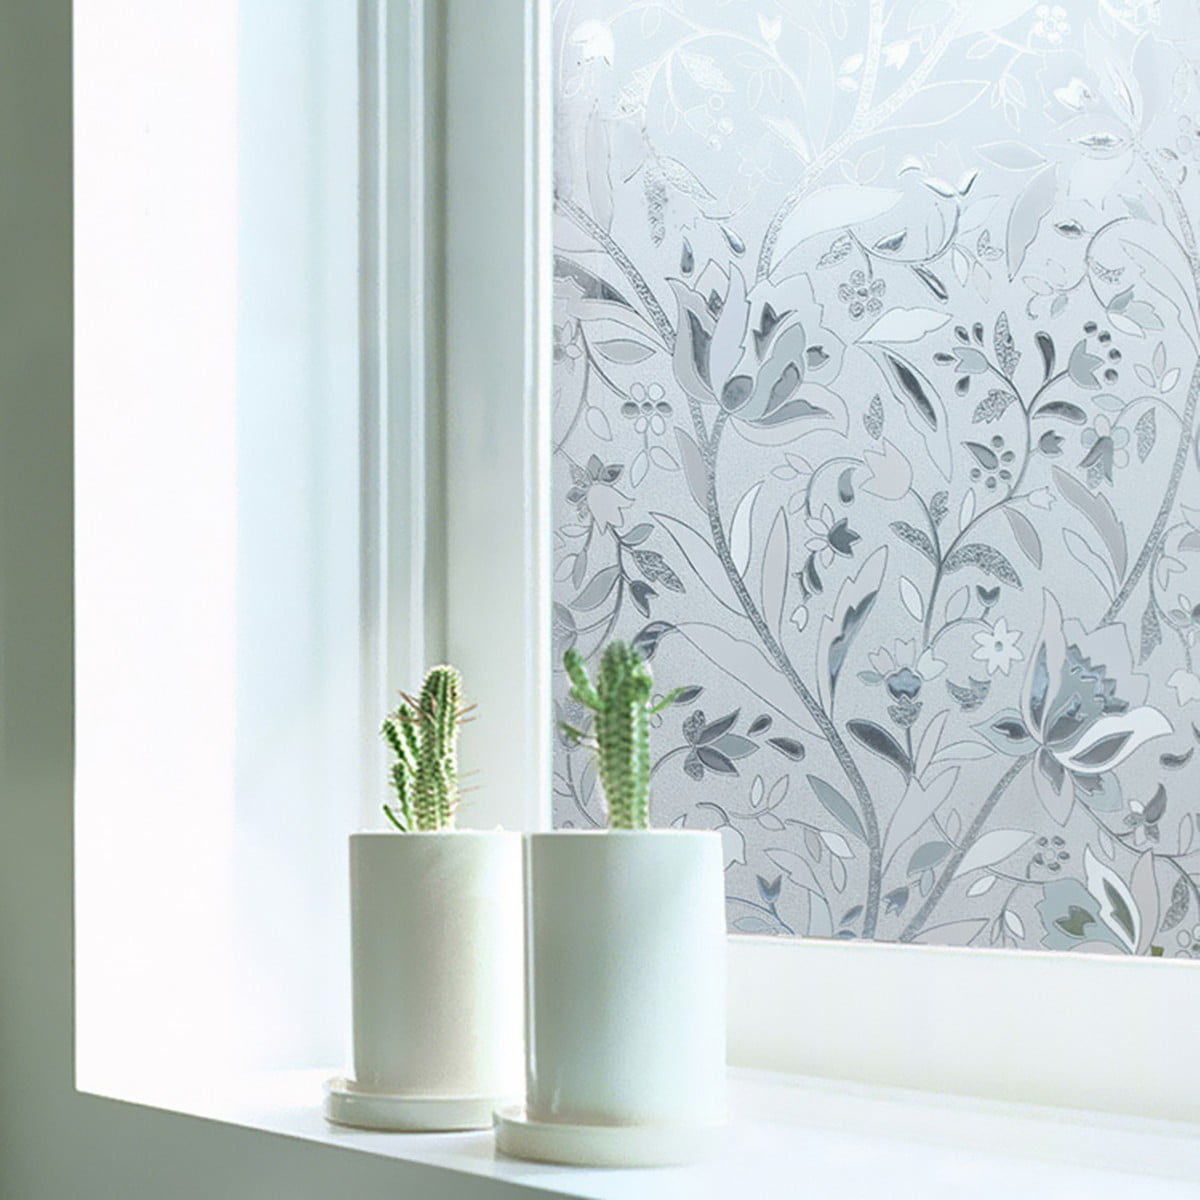 Waterproof Frosted Opaque Window Film Privacy Adhesive Glass Stickers Sale 